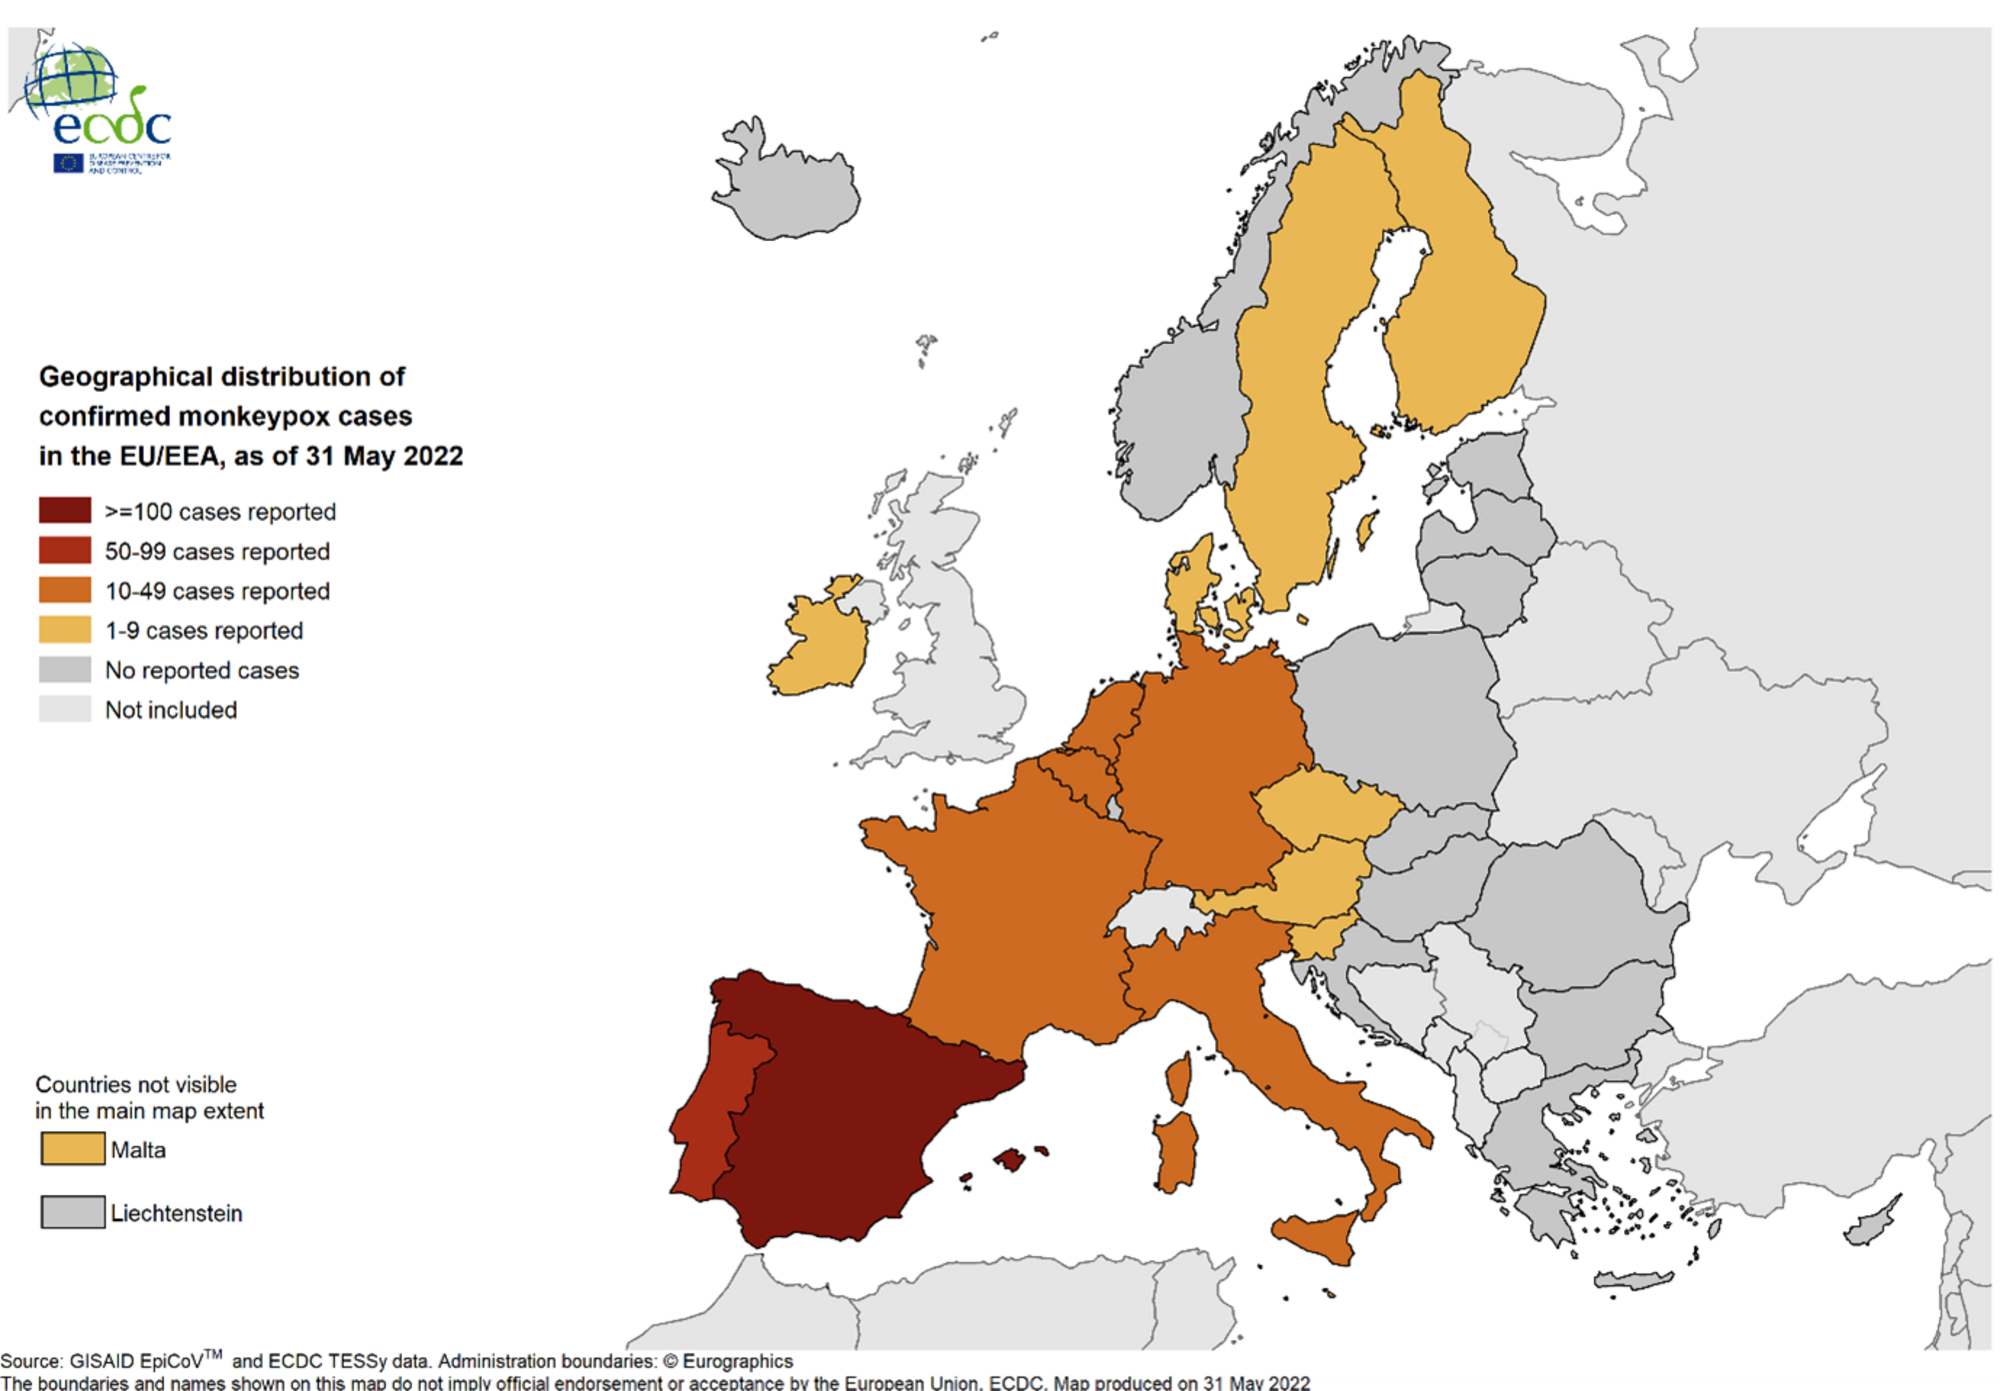 Geographical distribution of confirmed cases of monkeypox in EU/EEA countries, as of May 31st 2022.